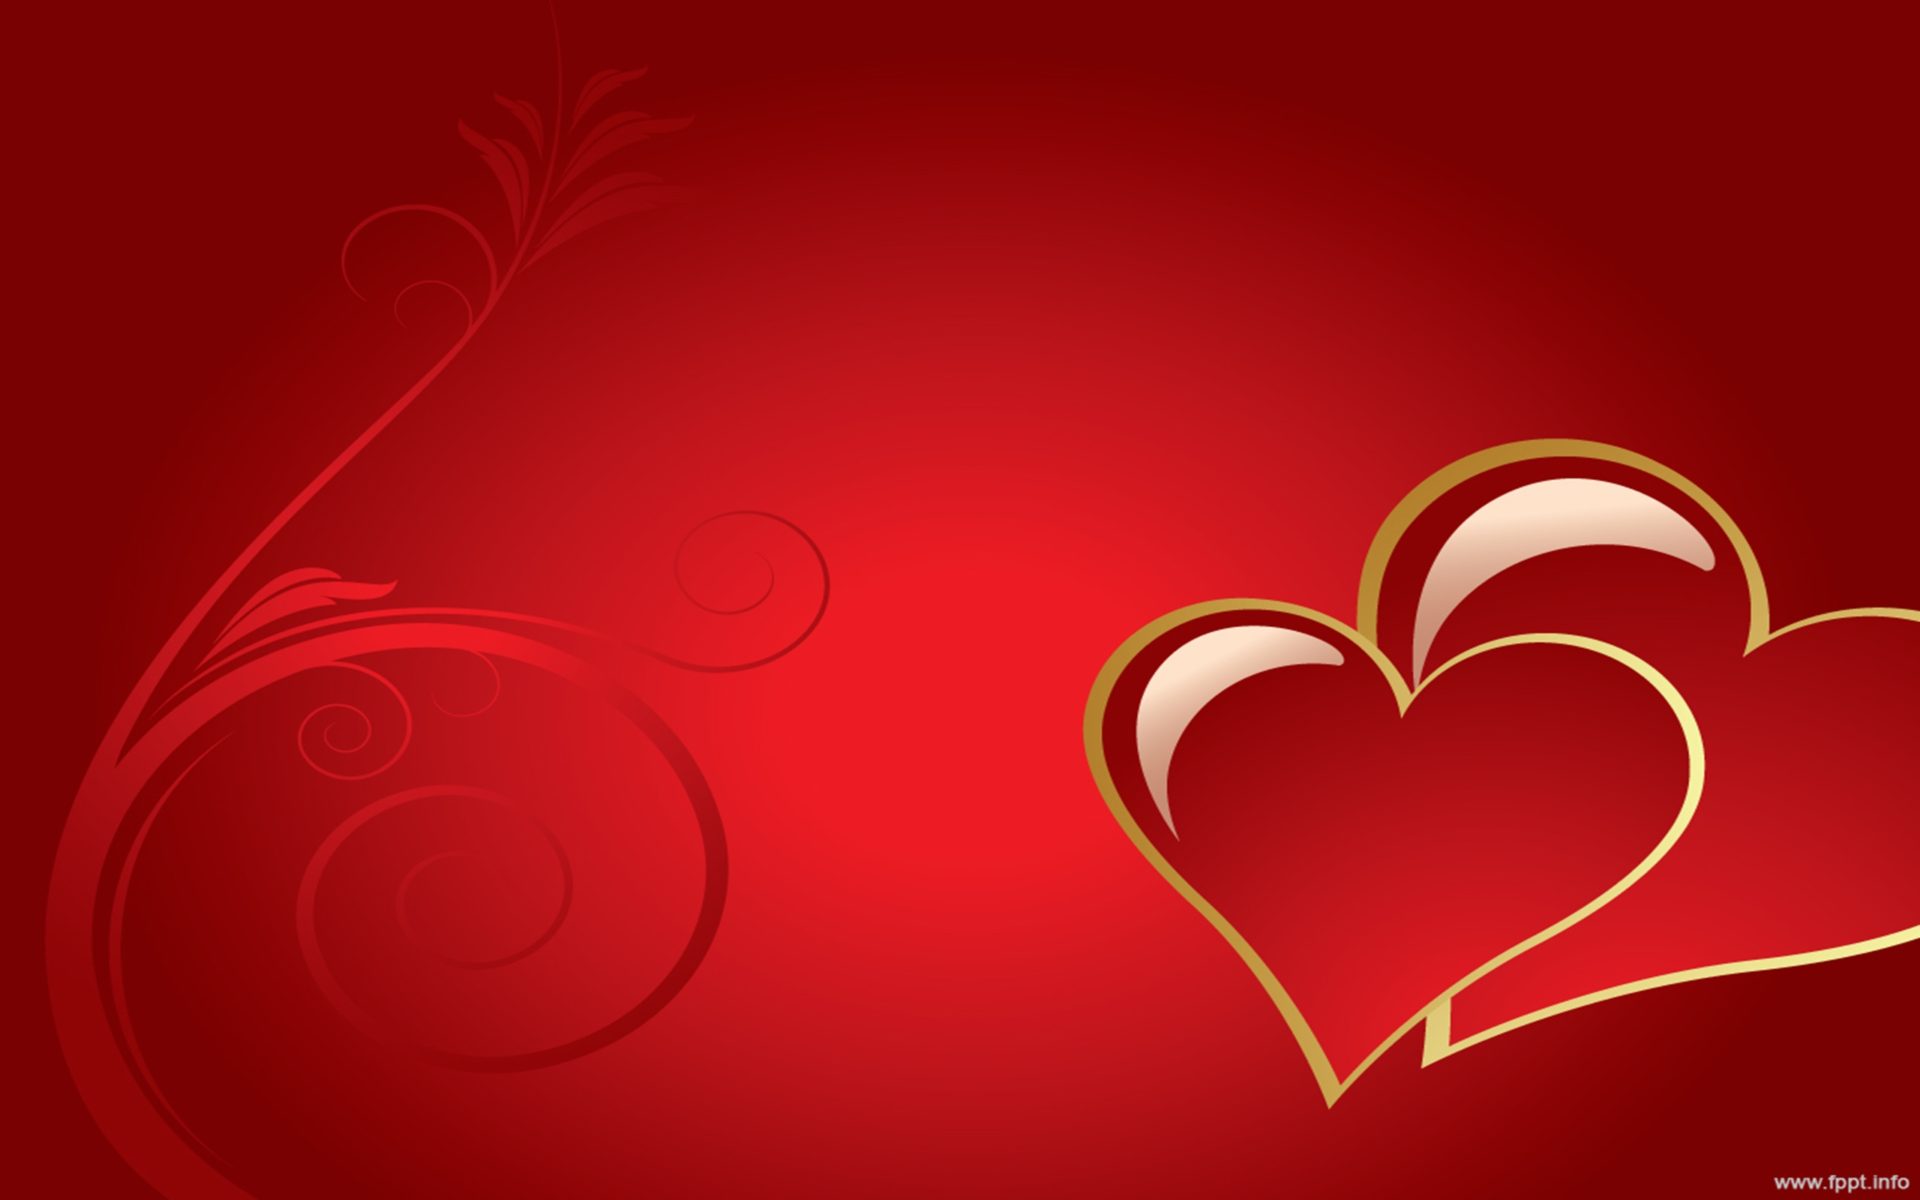 Valentines day hearts red wallpaper hd for desktop